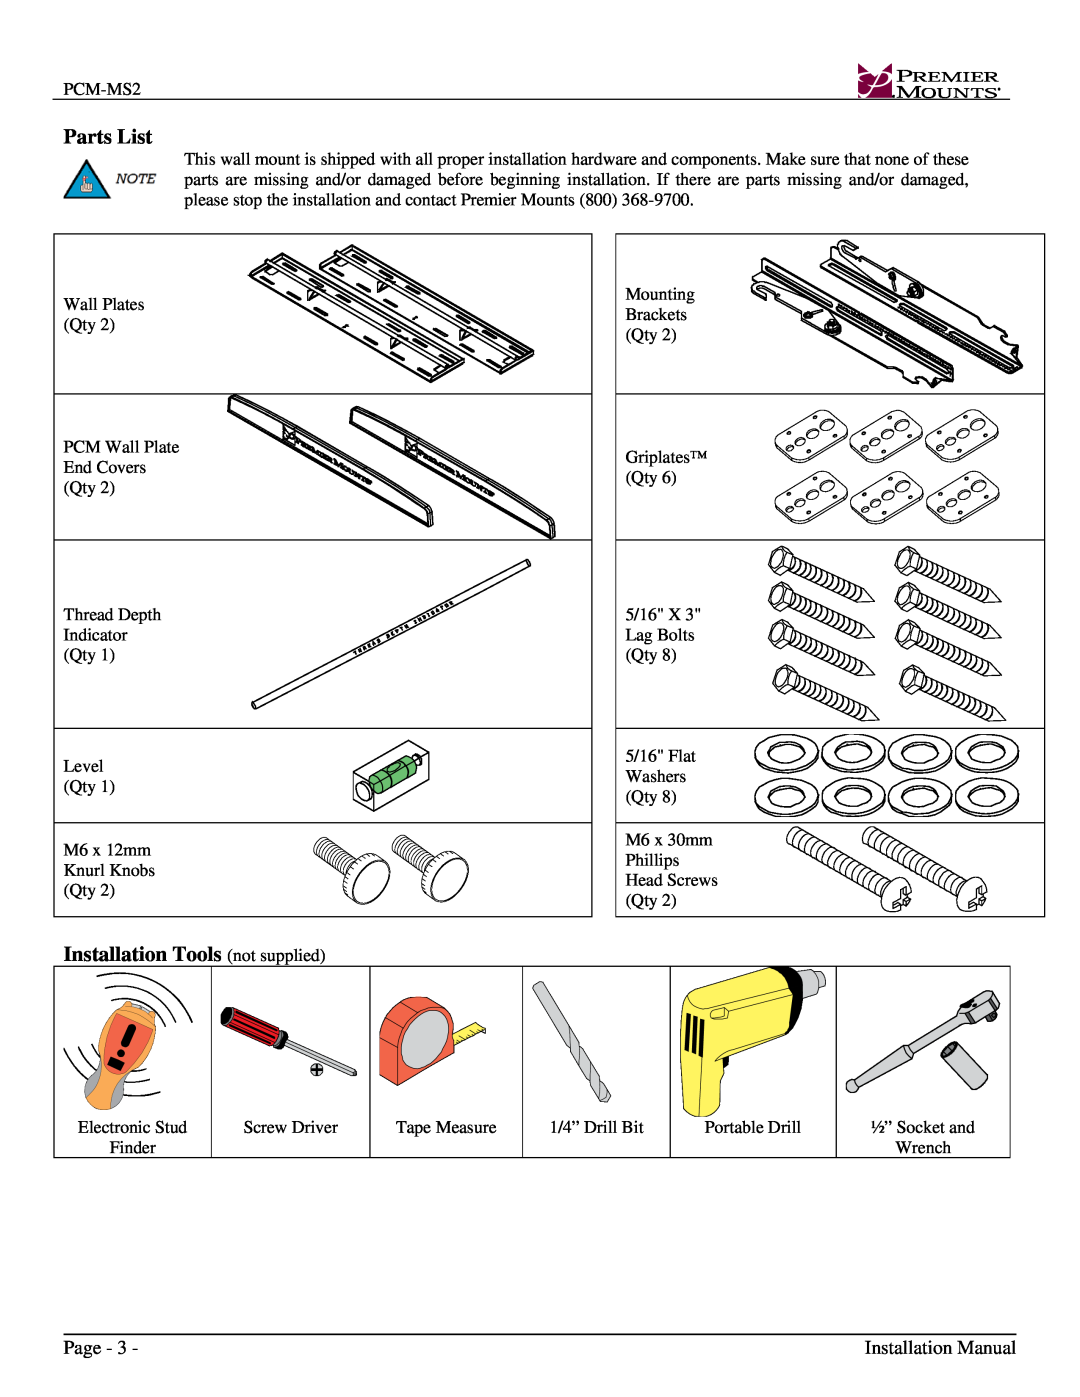 Premier Mounts PCM-MS2 installation instructions Parts List, Installation Tools not supplied, Page, Installation Manual 